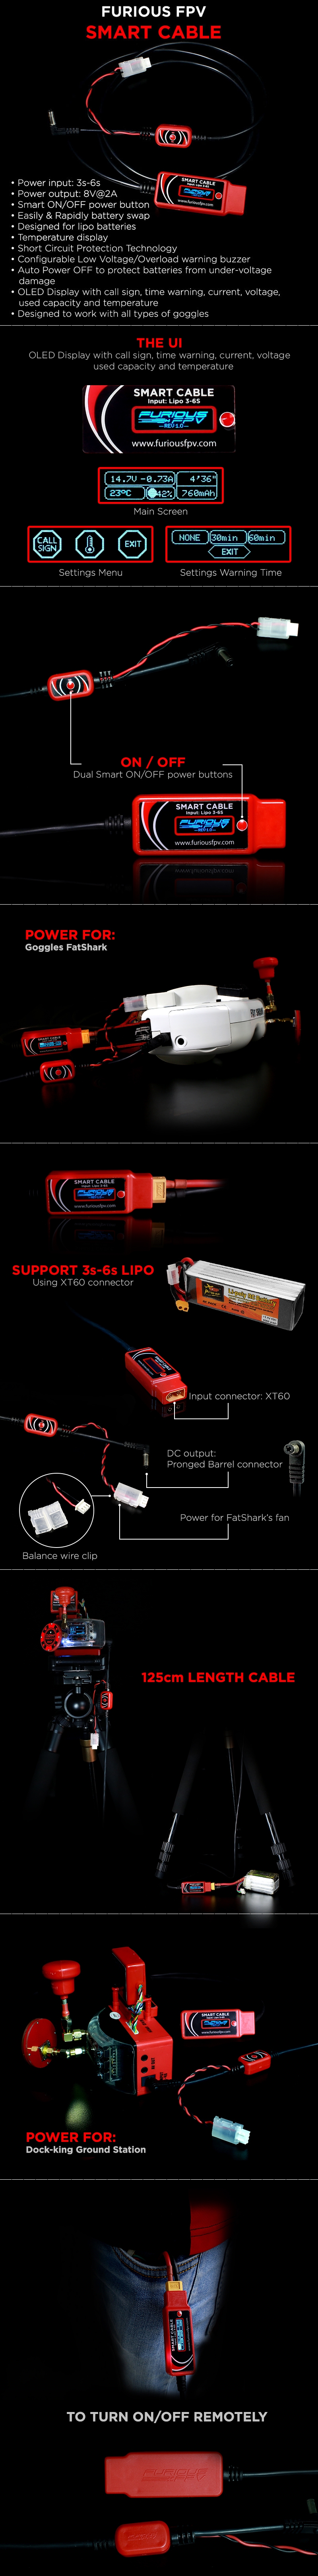 FuriousFPV Smart Cable Wire 125cm Support 3-6S LiPo Battery For FPV Goggles Ground Station